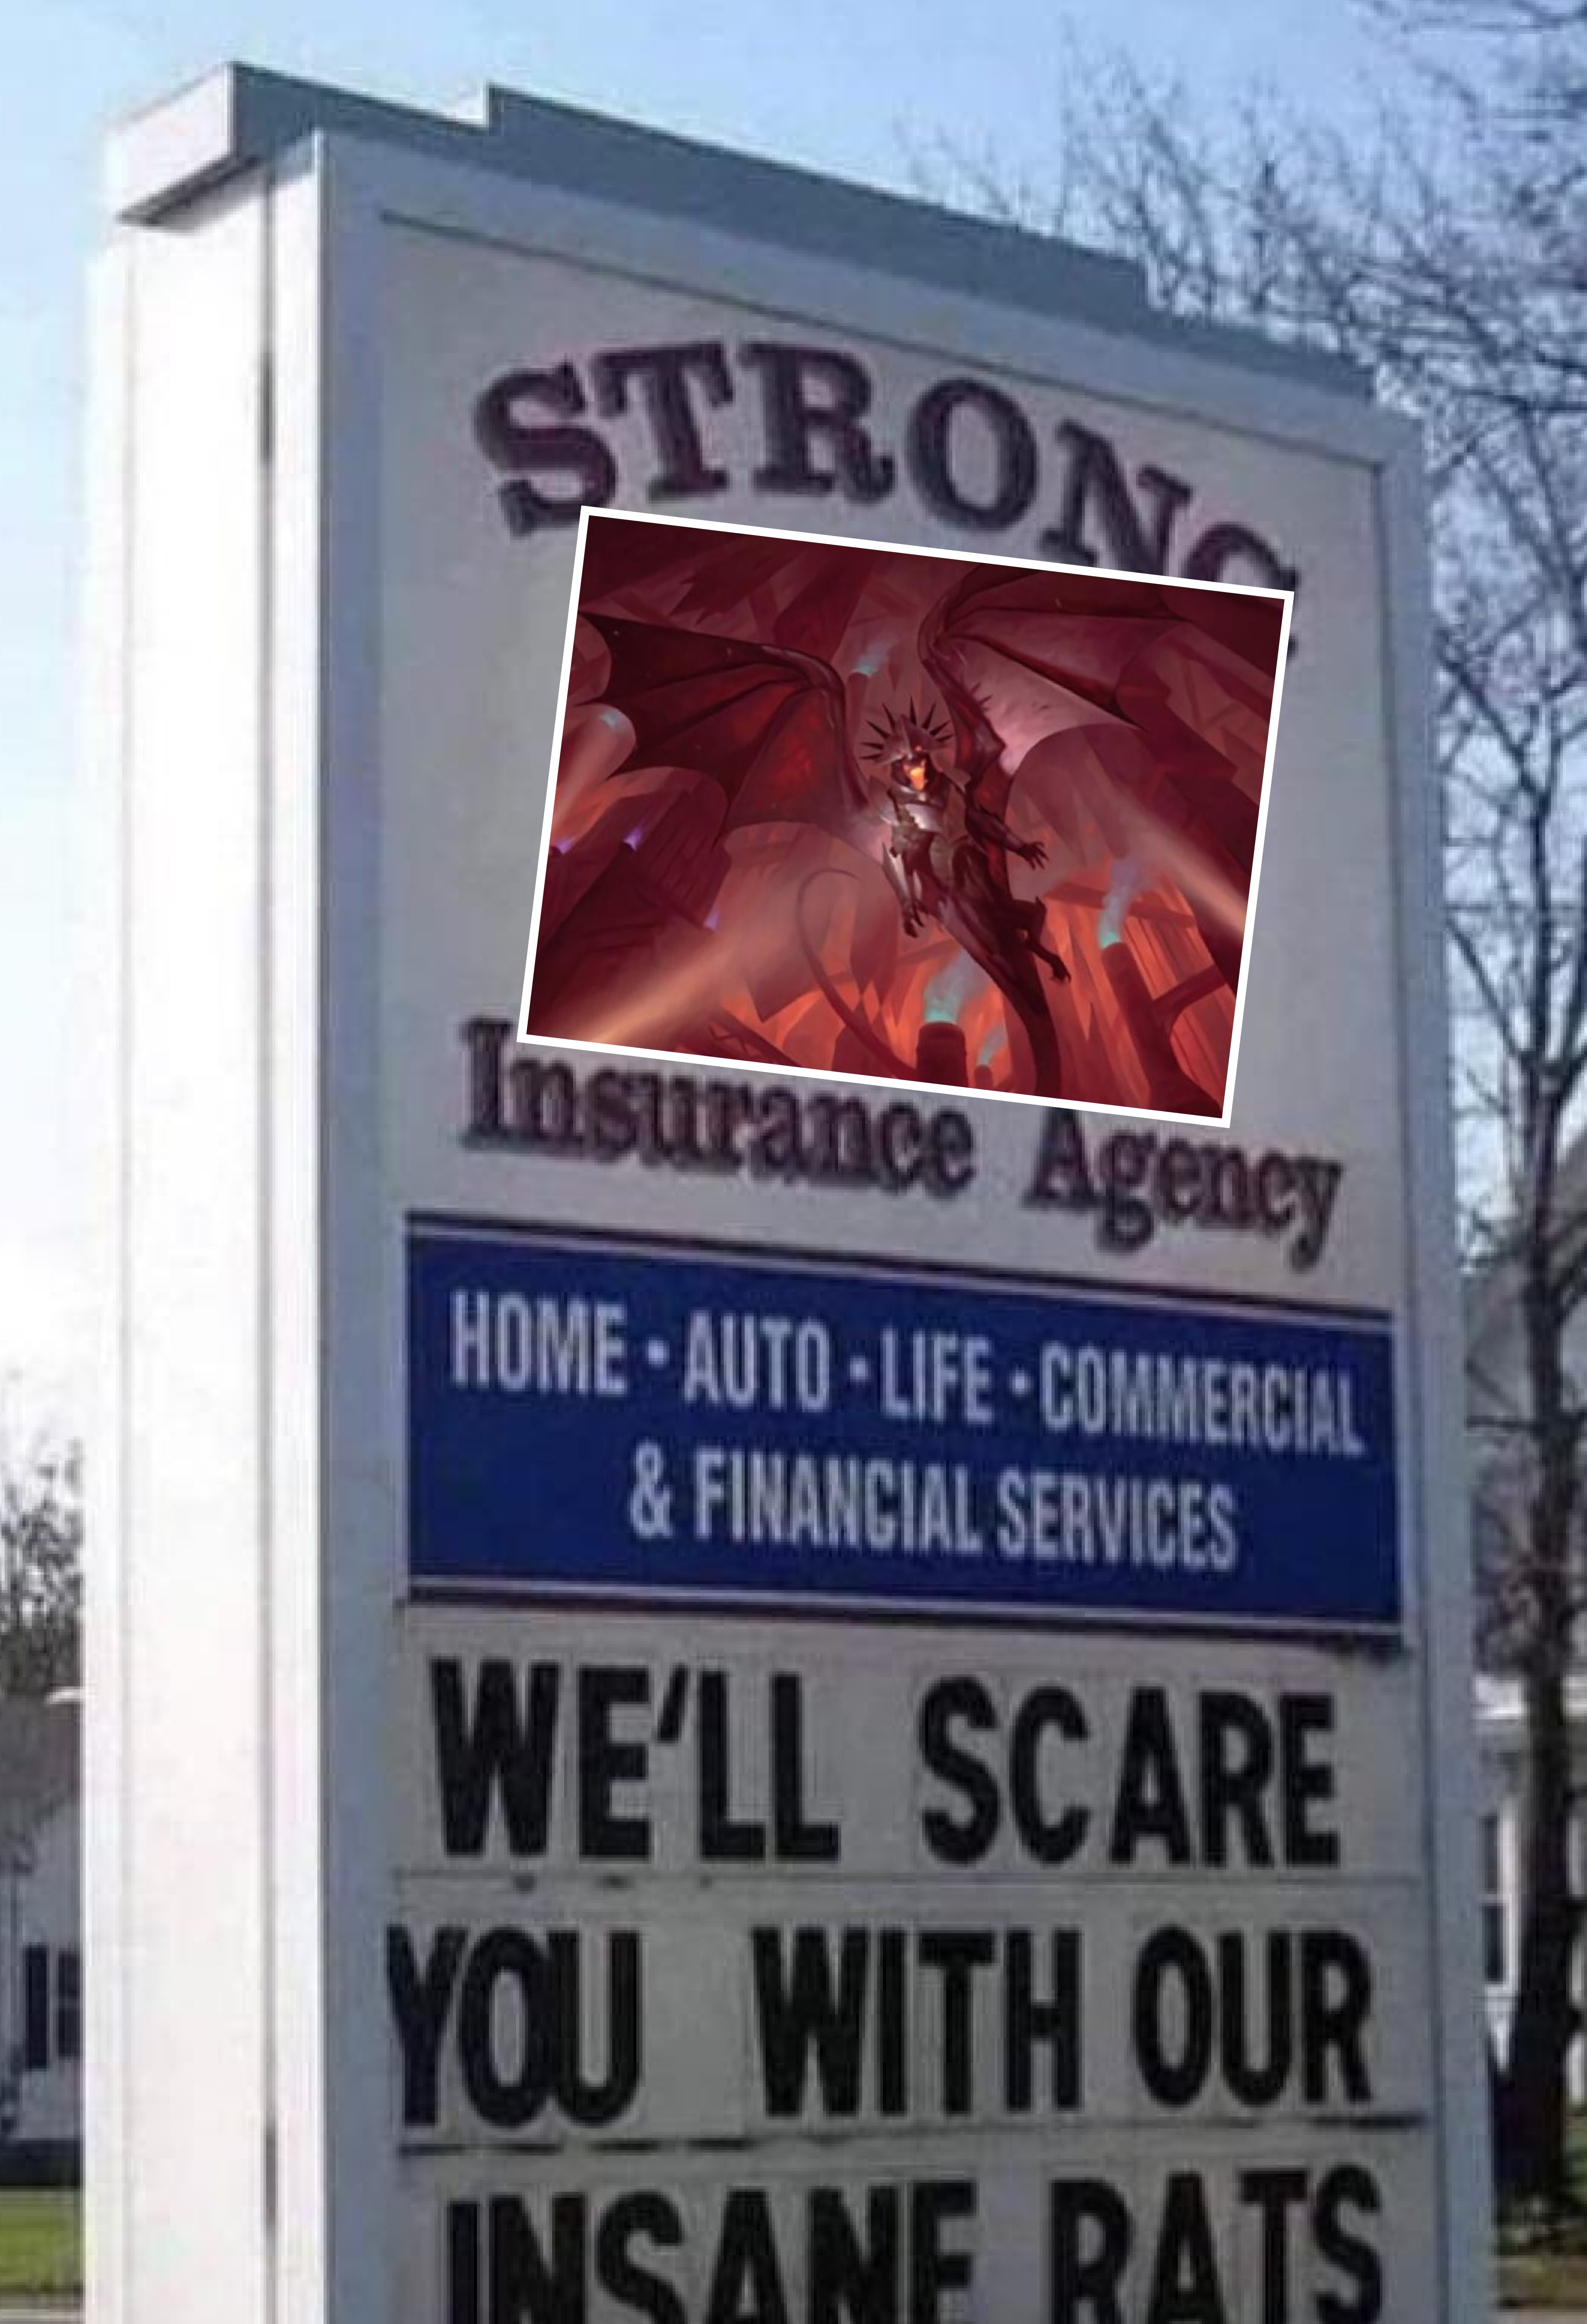 an insurance sign that states 'we'll scare you with our insane rats,' with ziatora poorly photoshopped over the logo